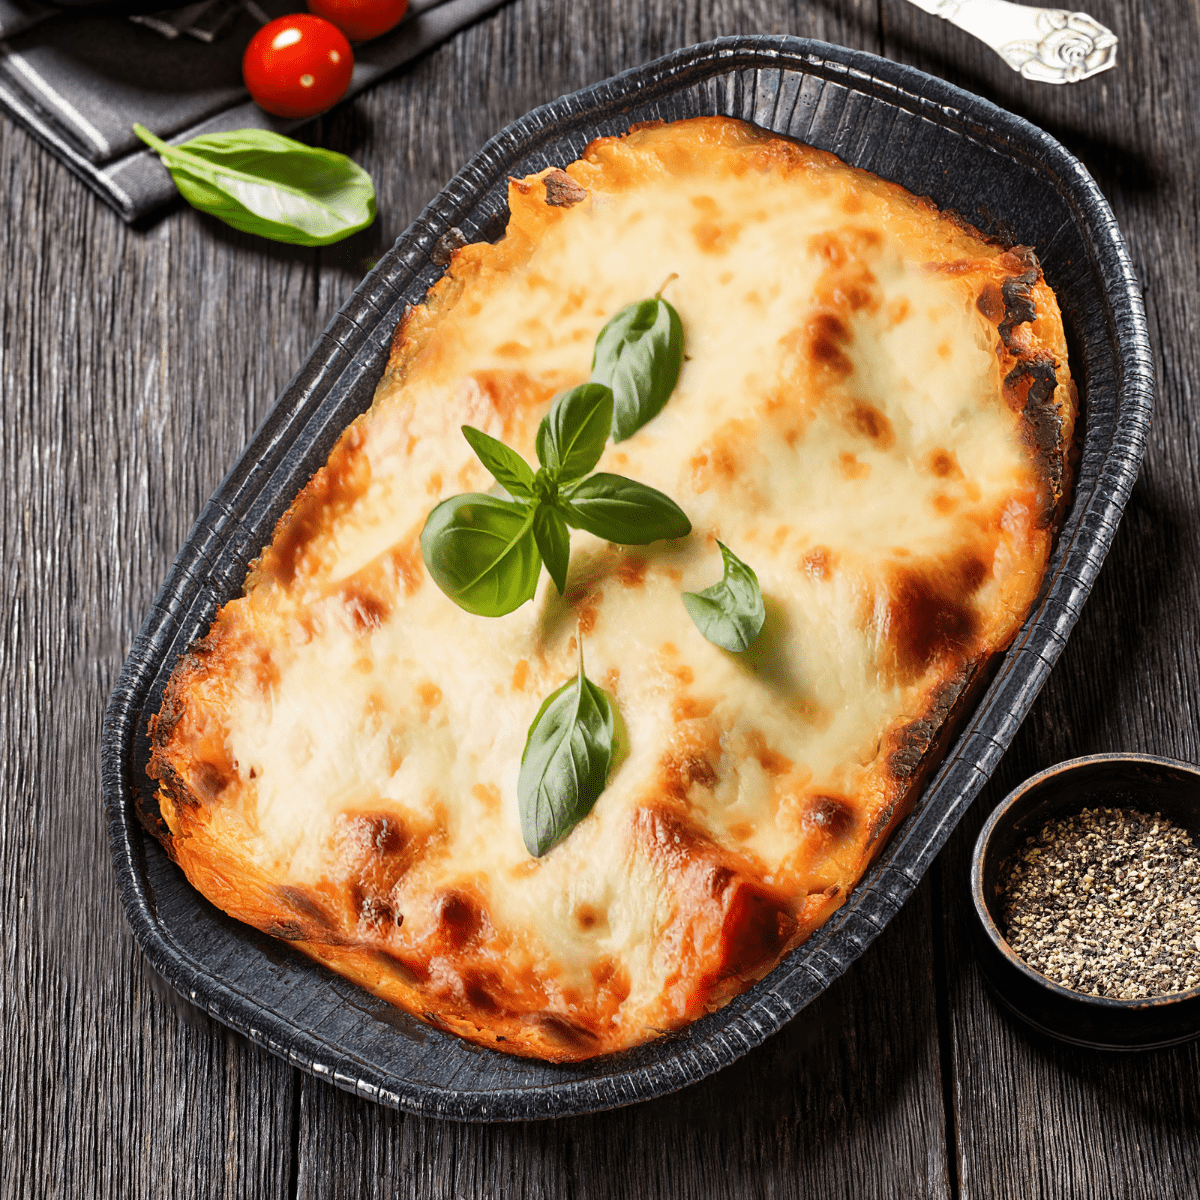 SOY LASAGNA made with soy cream & soy meat DKINT - Tokyo Fresh Direct